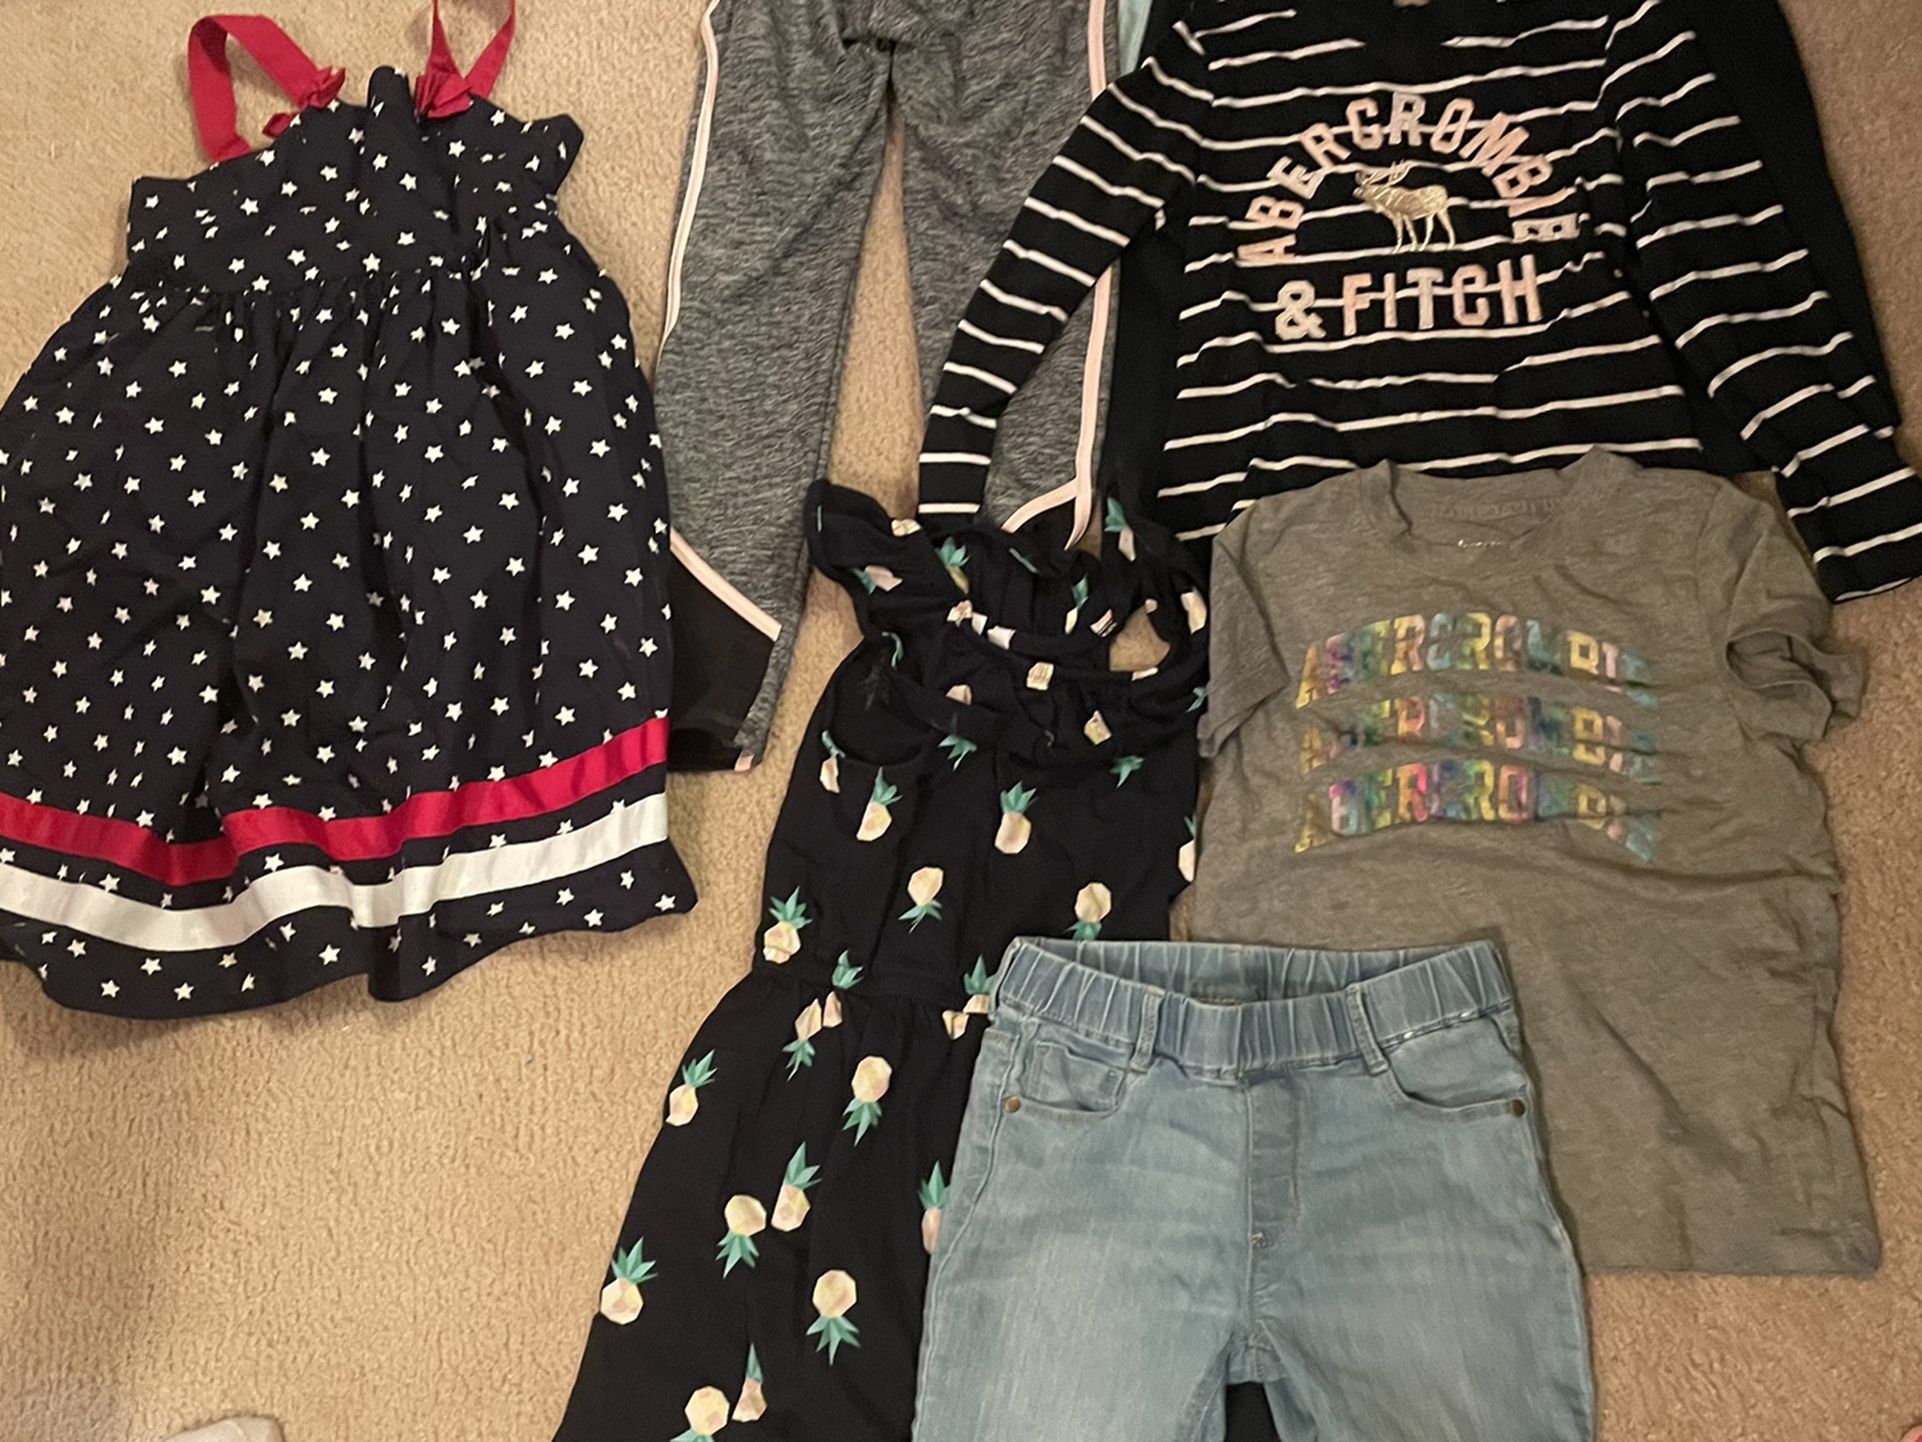 Huge Lots Of Girls Brand Name 5-7 Size Clothes